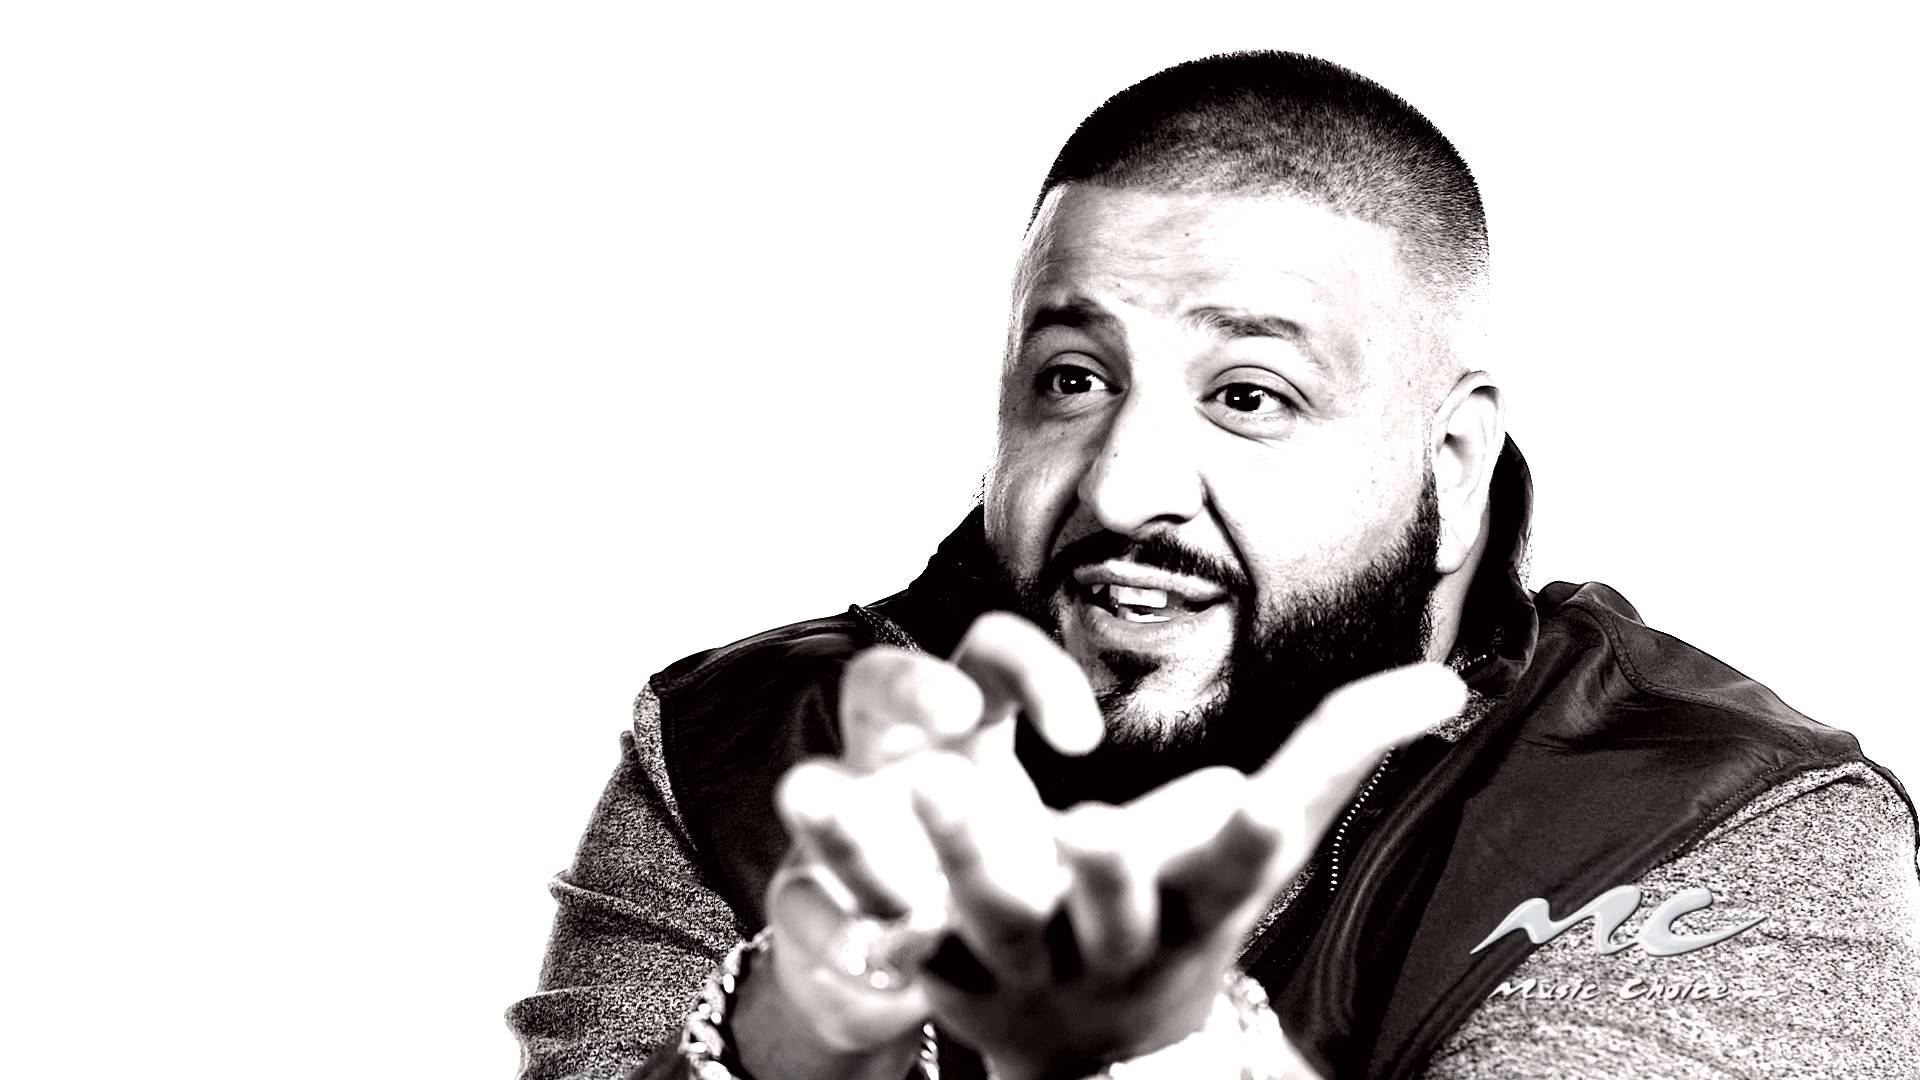 DJ Khaled is the motivational speaker you need. Just watch